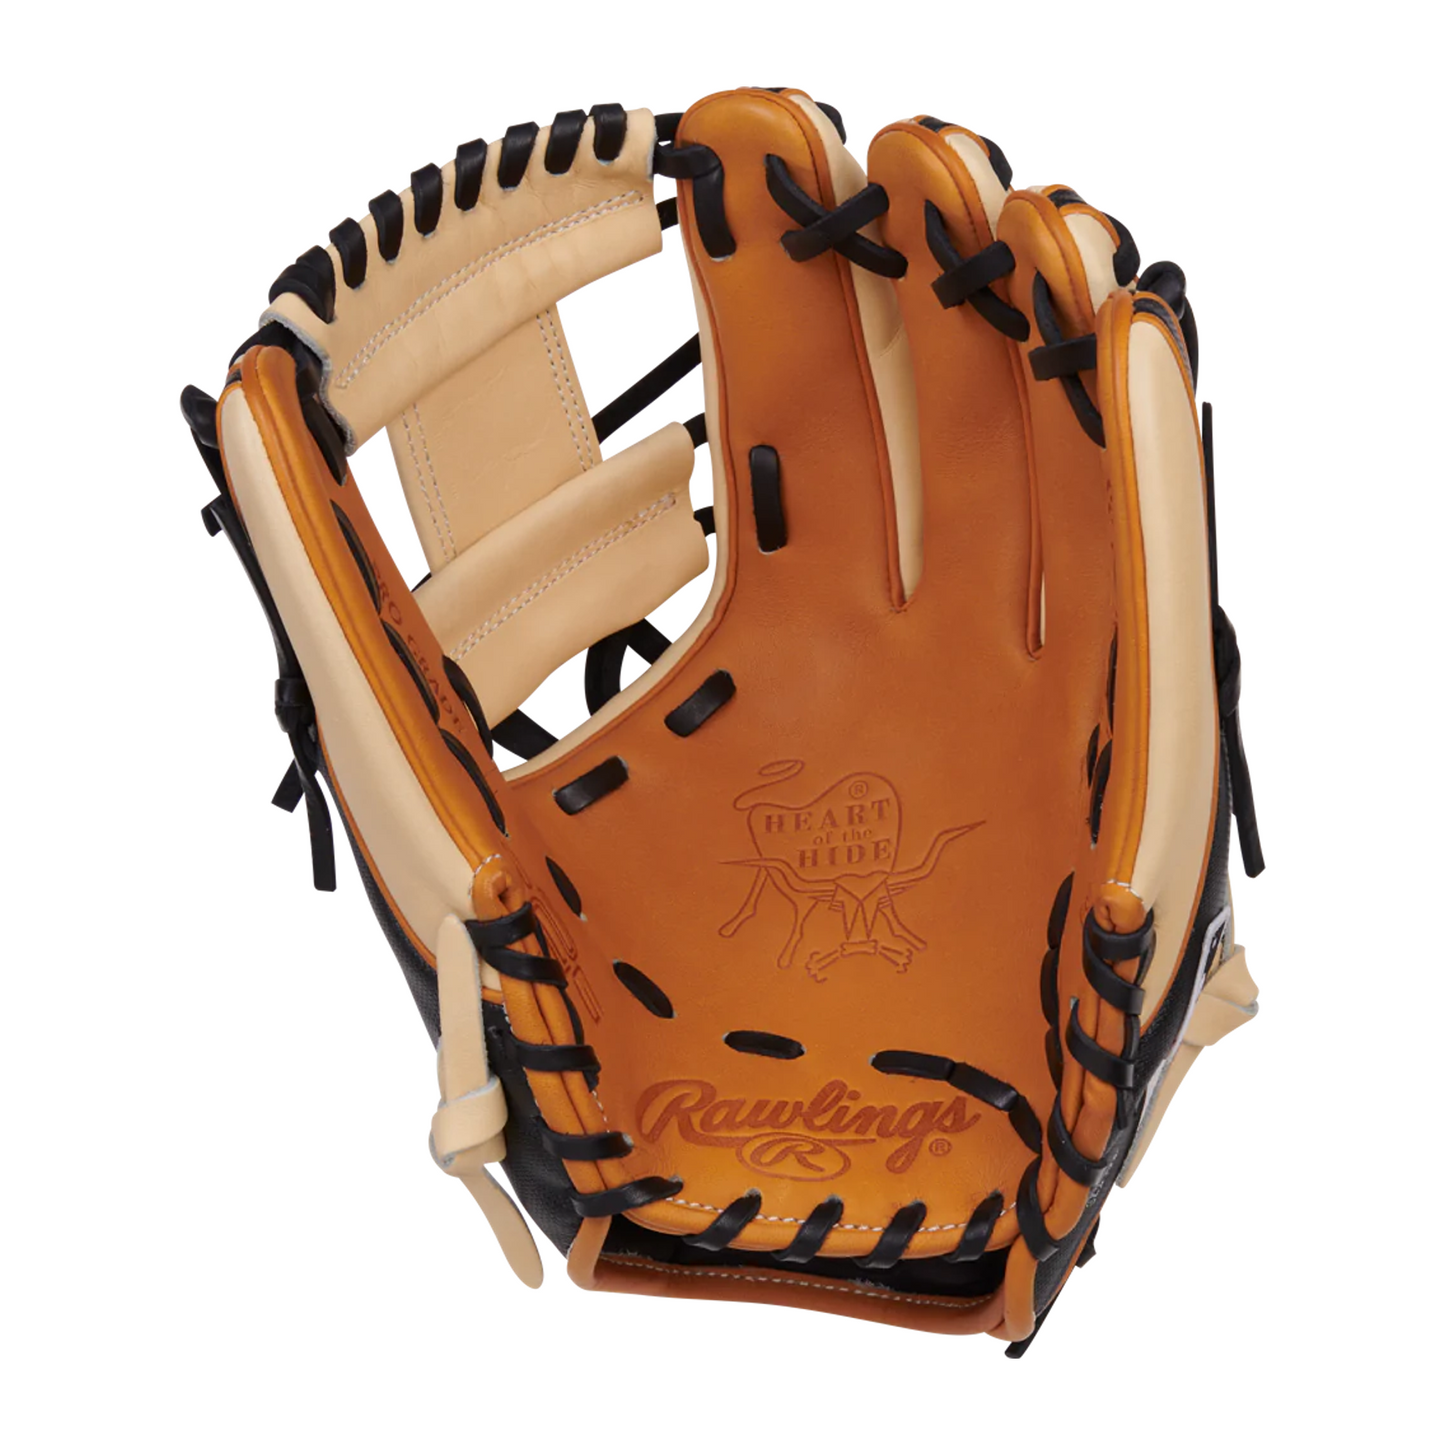 HEART OF THE HIDE R2G PROR314-2TCSS 11.5" BASEBALL GLOVE 2022